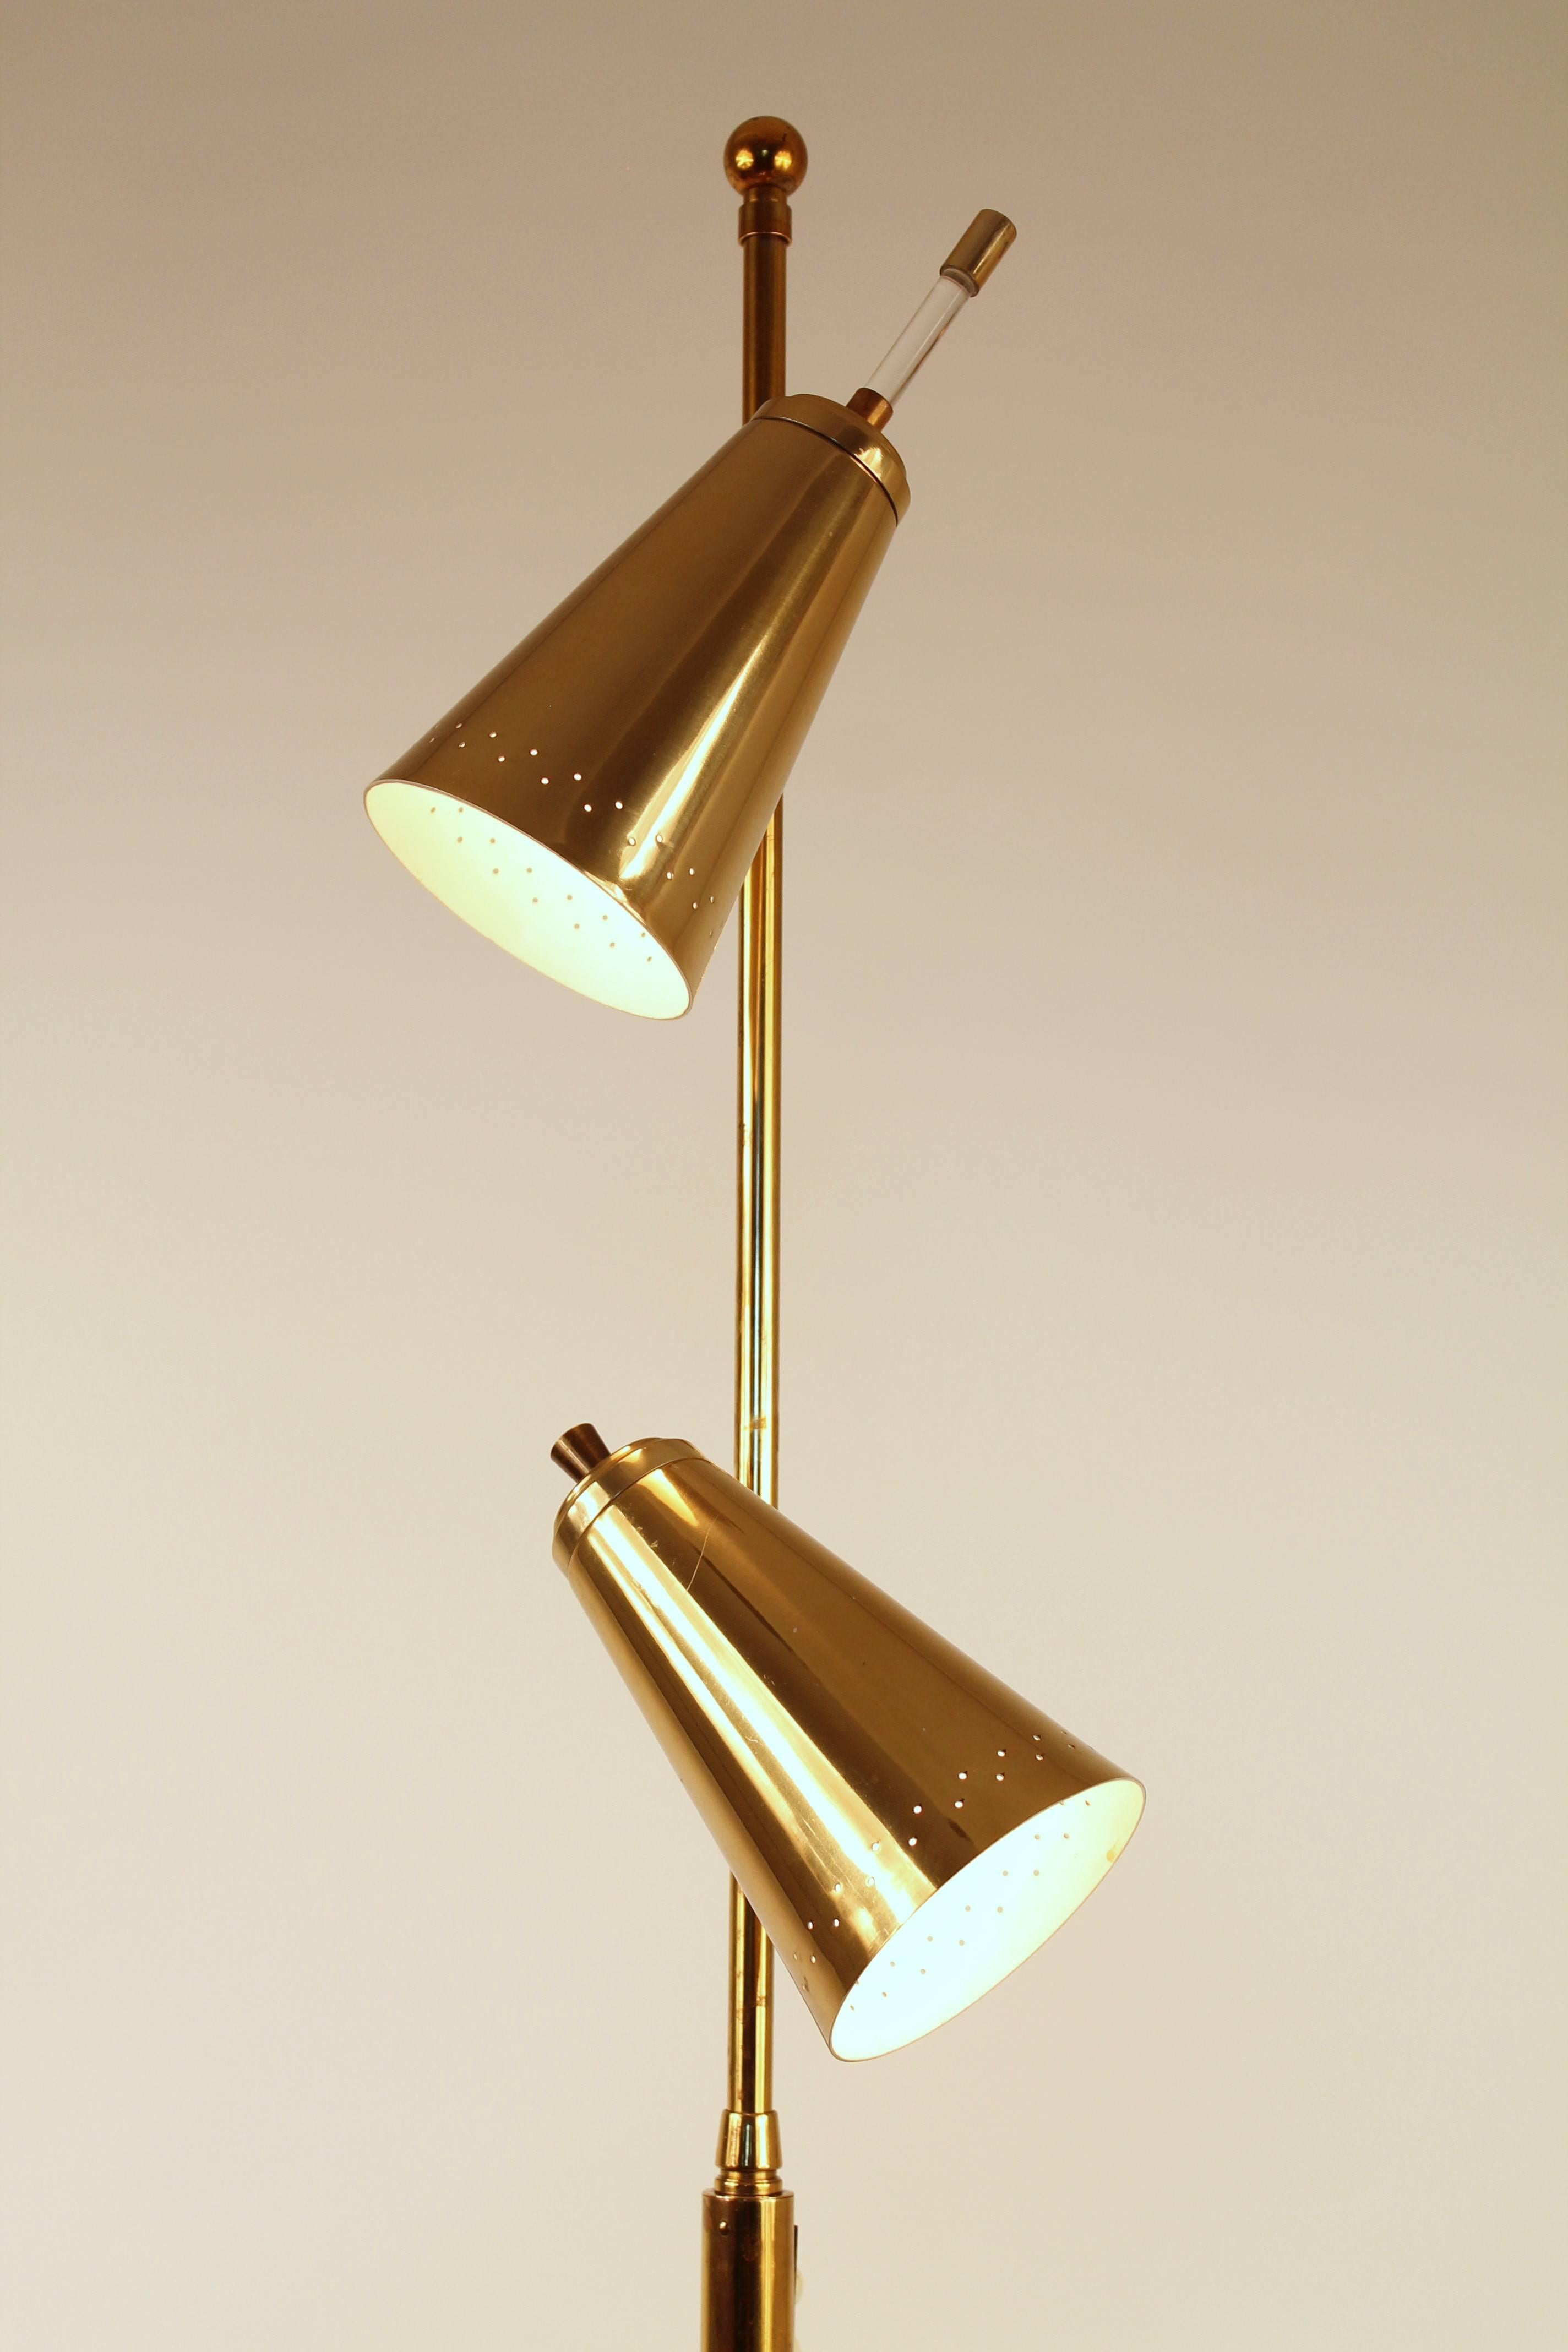 Finely pierced conical brass shade .

One shade is  topped with a lucite and a brass finial. 

Walnut base and lower pole. 

Top stem and all remaining hardware are made of brass.

2 Regular E26 socket controlled by two individual ON/OFF rotating